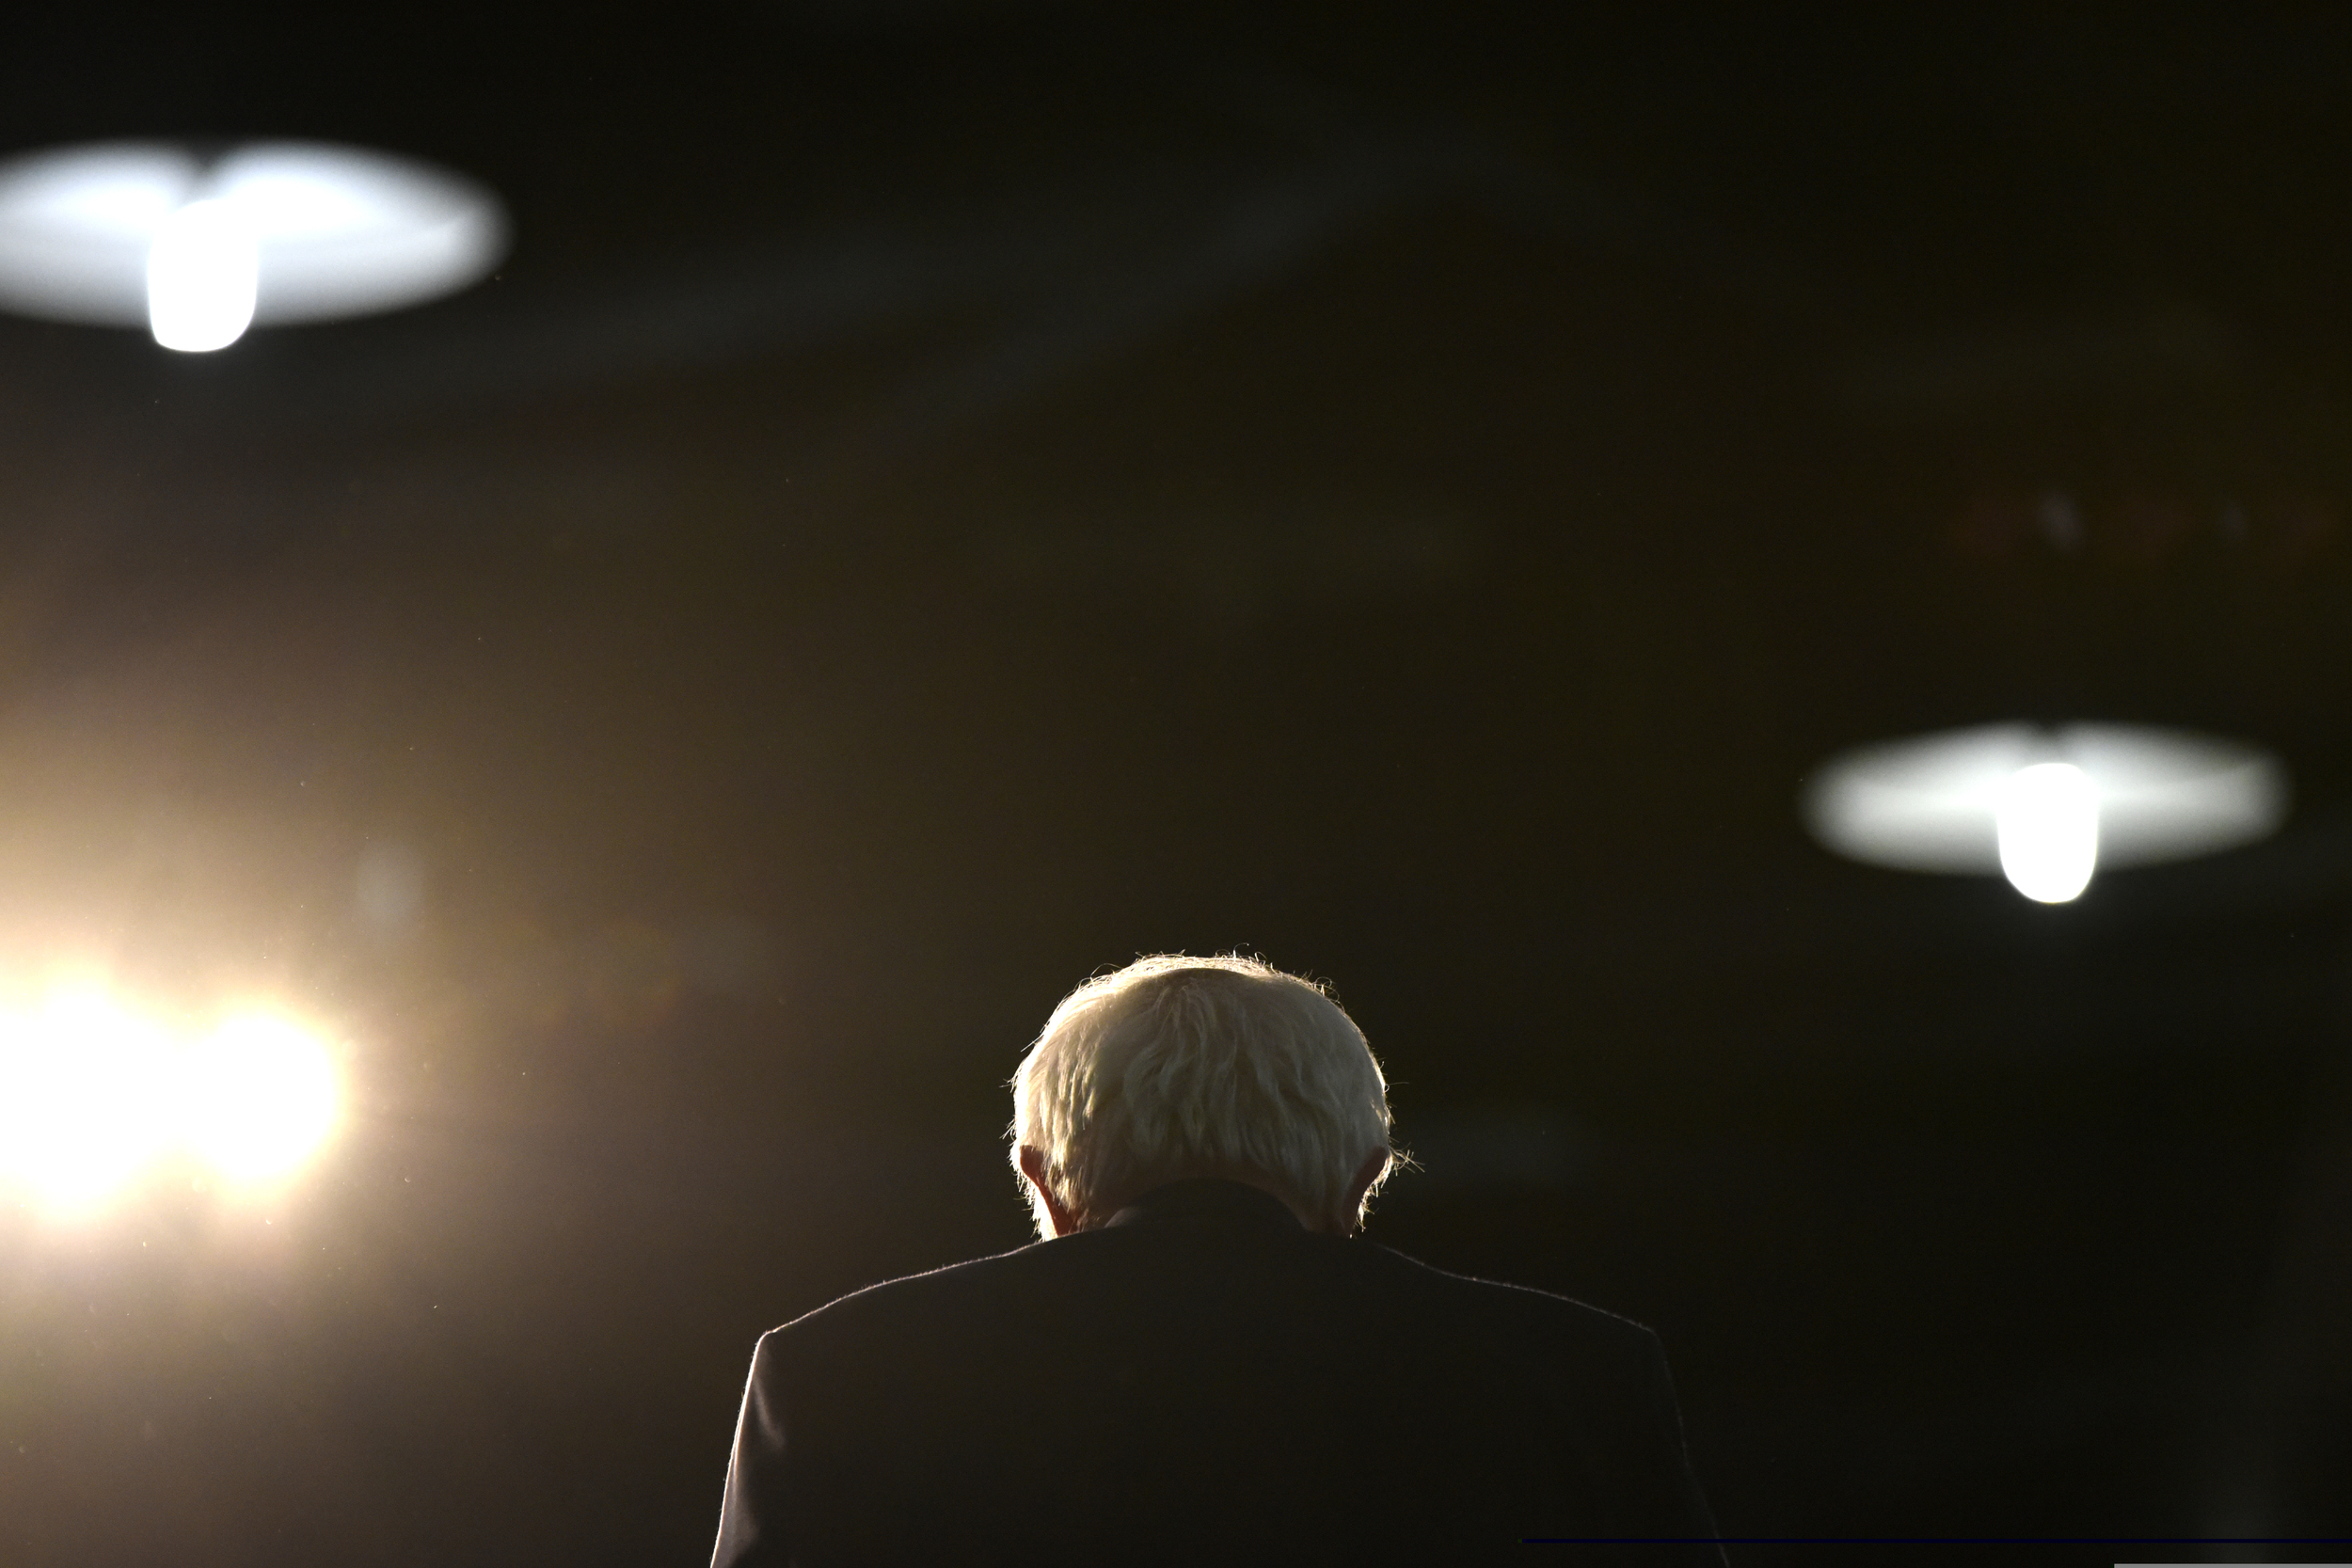  Democrat presidential candidate Bernie Sanders speaks to supporters at a rally in Tulsa Oklahoma. 